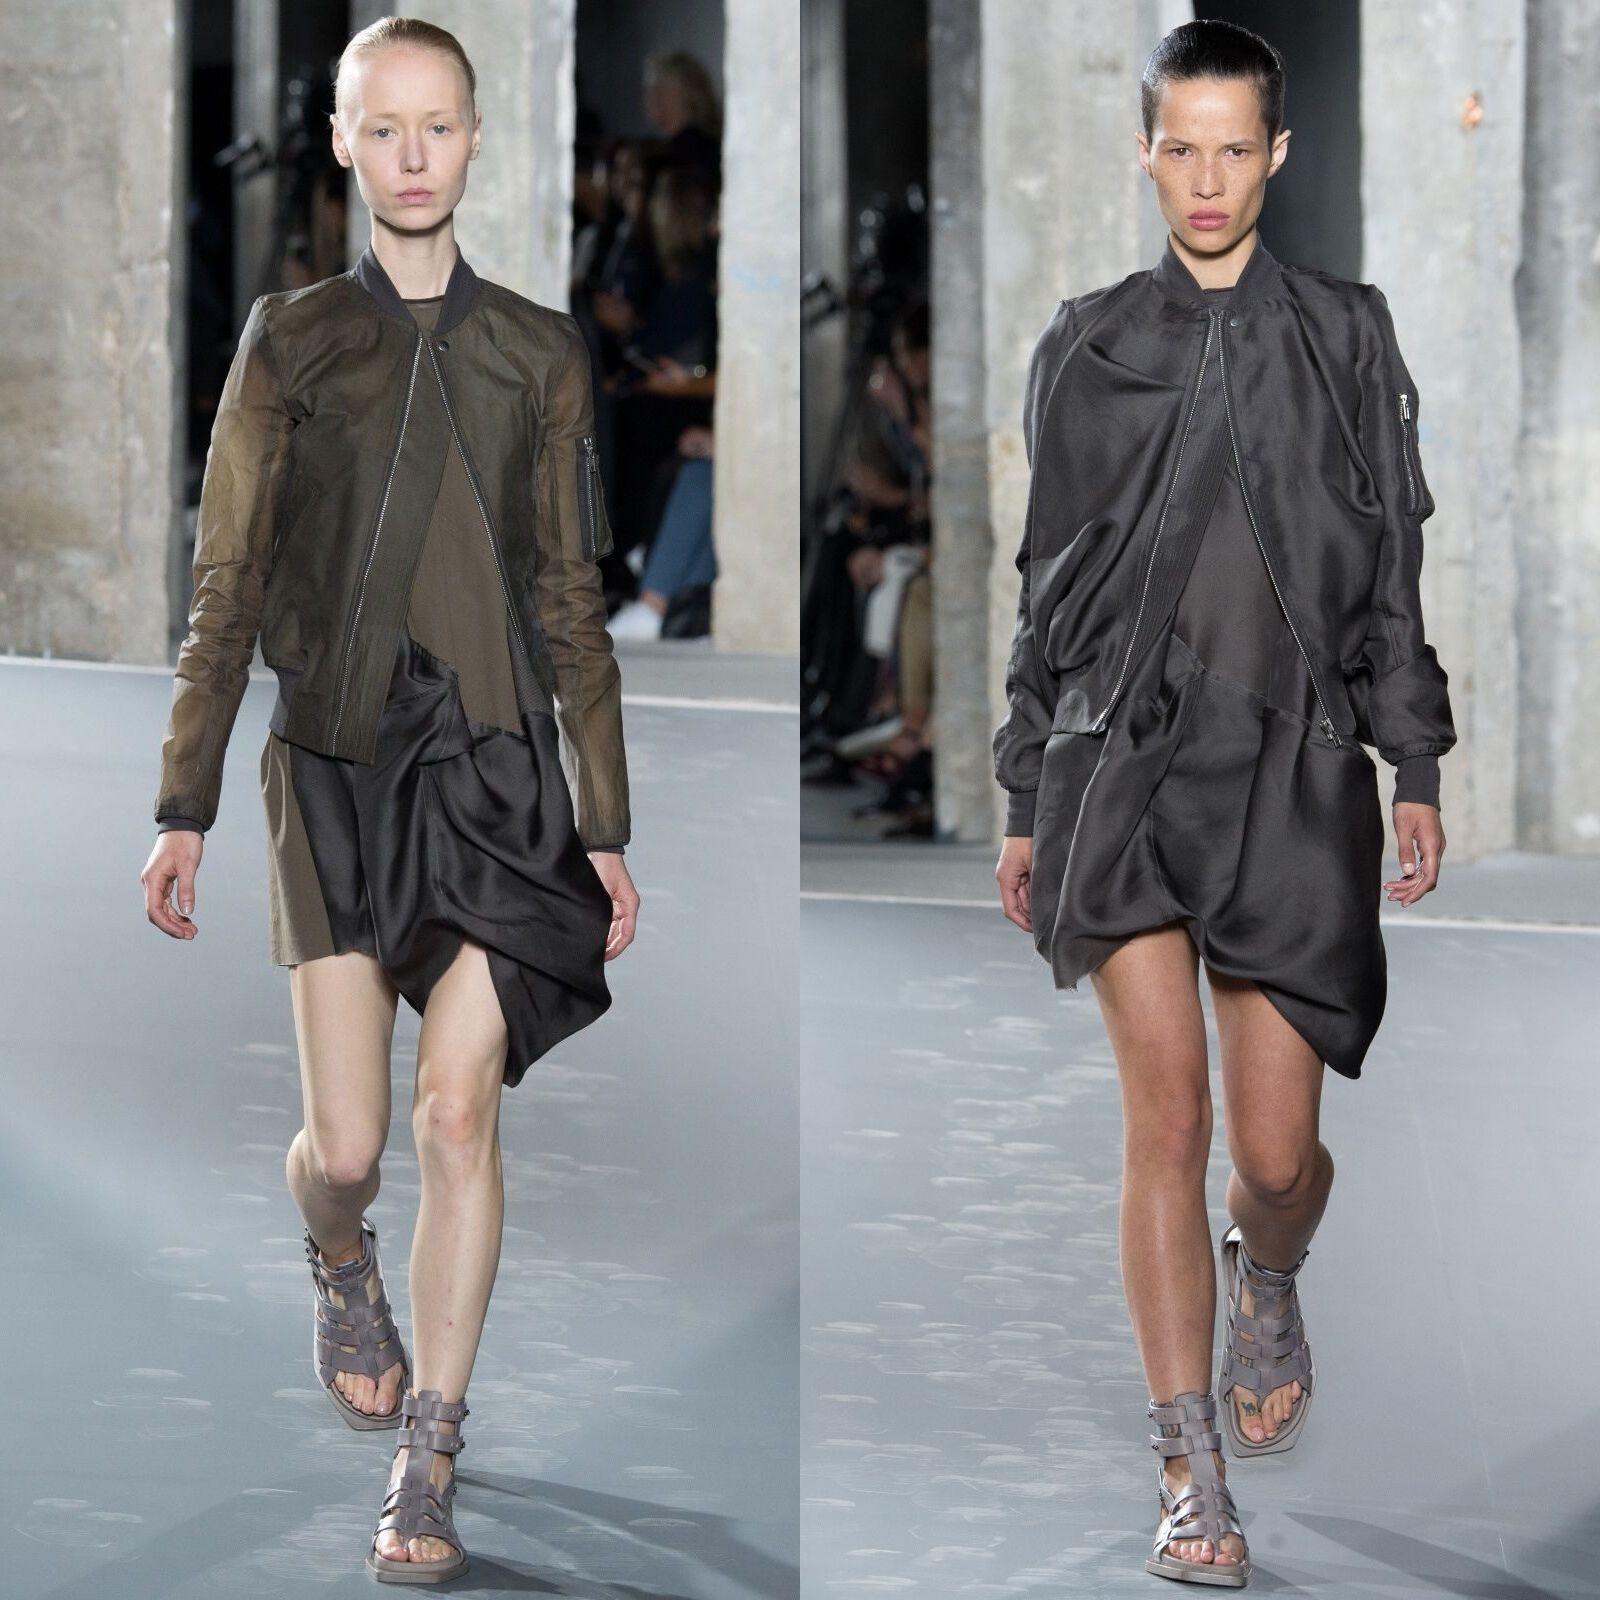 new RICK OWENS Runway Cyclops grey leather angular gladiator sandals EU37 US7
RICK OWENS
FROM THE SPRING SUMMER 2016 CYCLOPS RUNWAY
Light taupe grey leather upper. 
Gladiator sandals.Angular oversized sole. 
Ankle straps with metal grommet buttons.